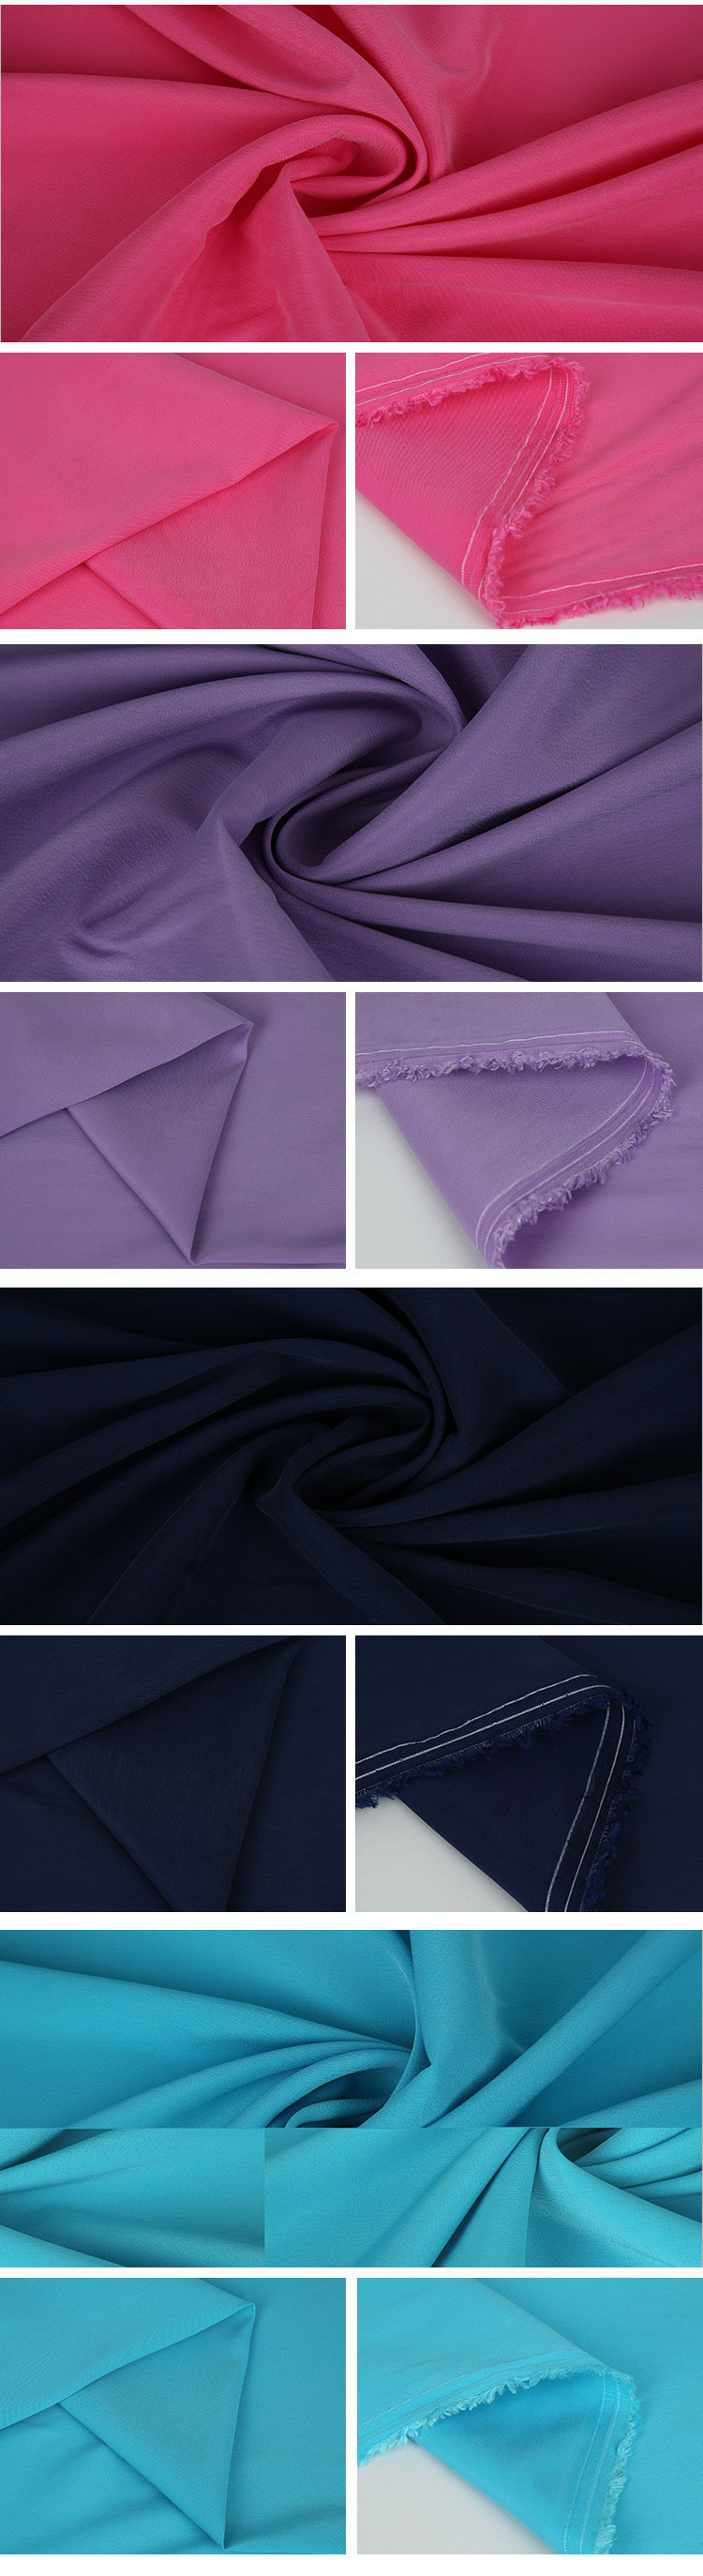 C10 Stretch CUPRO Material Solid Color 60% Cupro Twill/Bemberg Cupro